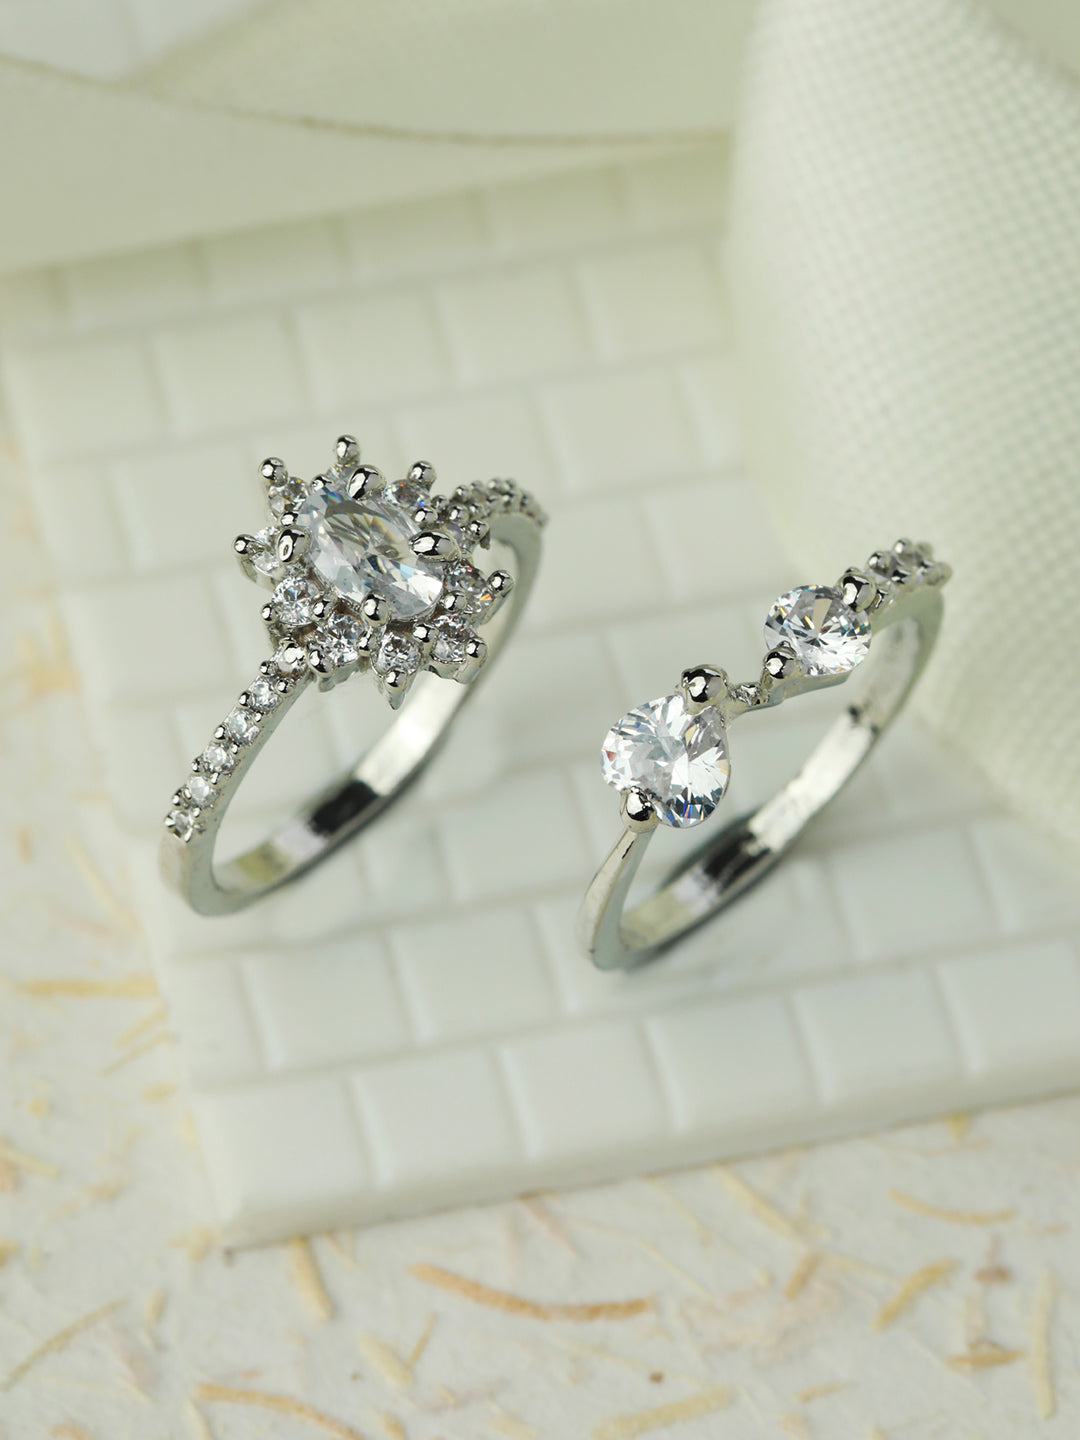 Floral American Diamond Silver Plated Ring Set of 2 - NOZ2TOZ